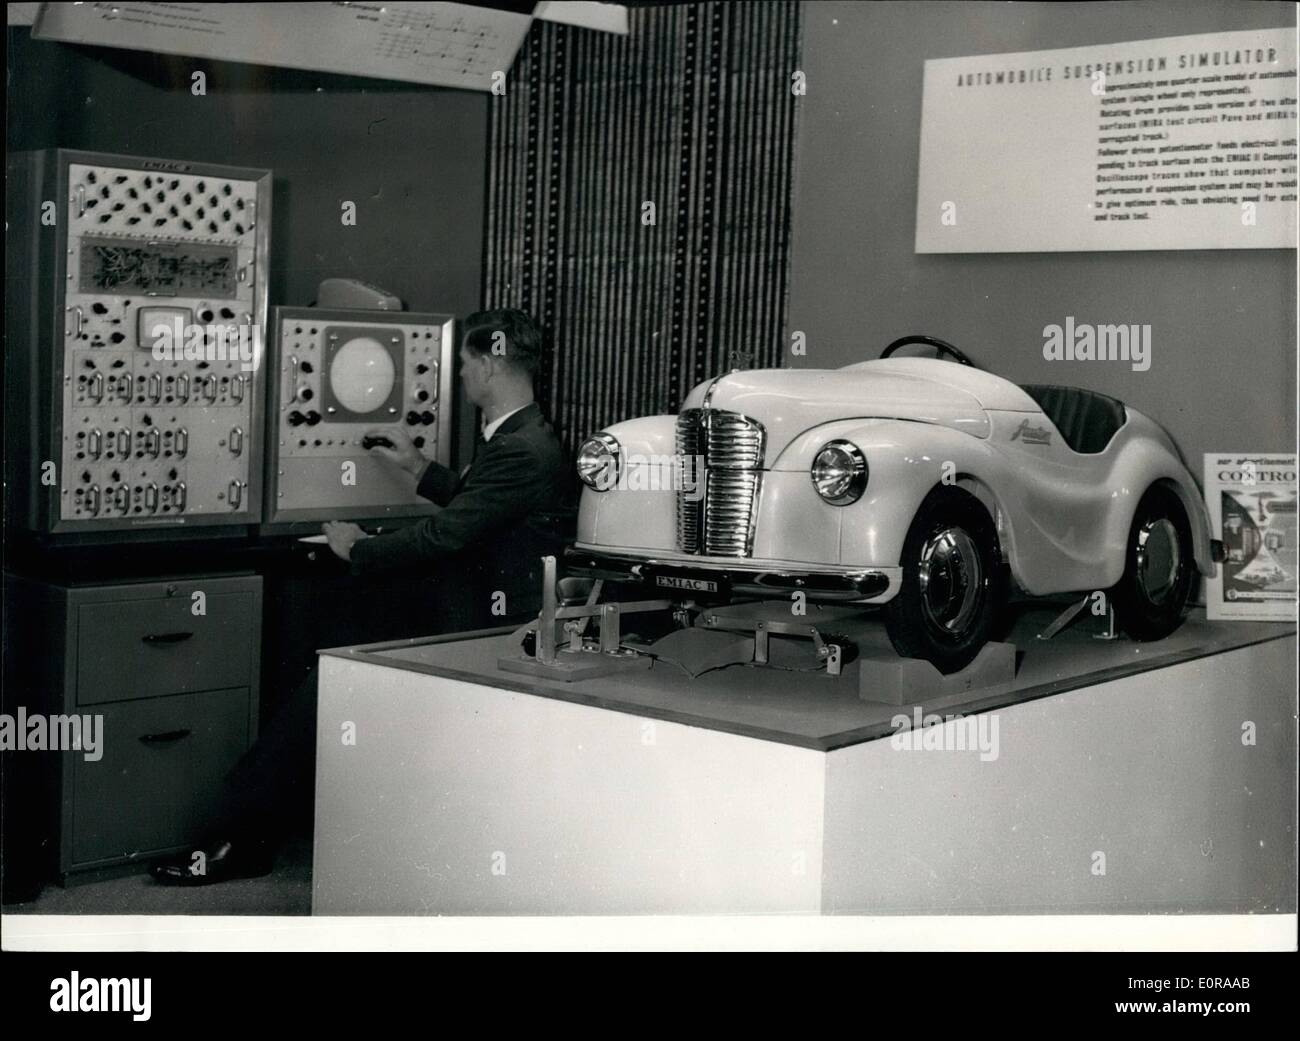 Nov. 11, 1958 - Lord Mayor Opens Electronic Computer Exhibition: The Lord Mayor of London Sir Harold Gillett this morning opened the Electronic Computer Exhibition at Olympia. Photo shows An operator at the panel - controls the Automobile Suspension Simulator - on a model - at the exhibition. The quarter scale model shows how E.M.I.A.C.II Computer can be used to test car suspension system under varying road conditions. Stock Photo